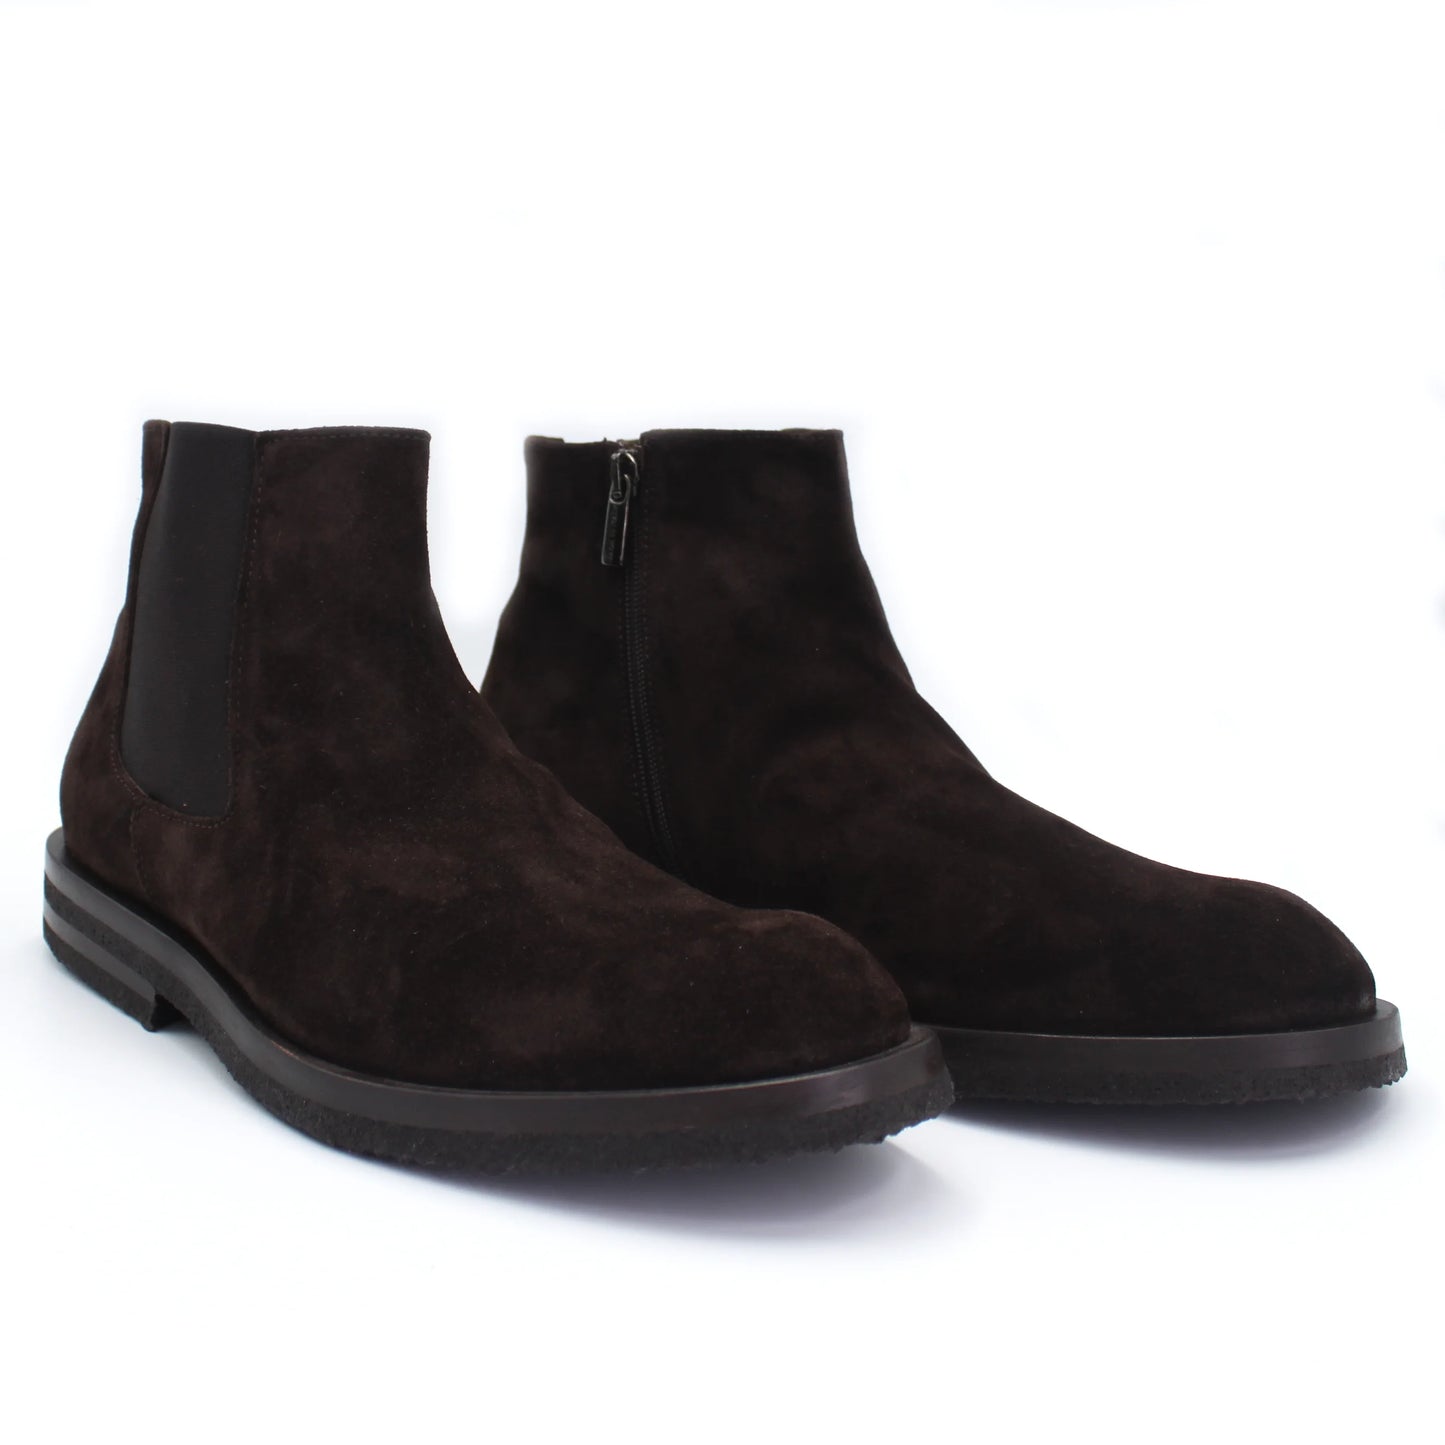 Men's Ankle Boot - Leather Suede Caffe - AC158